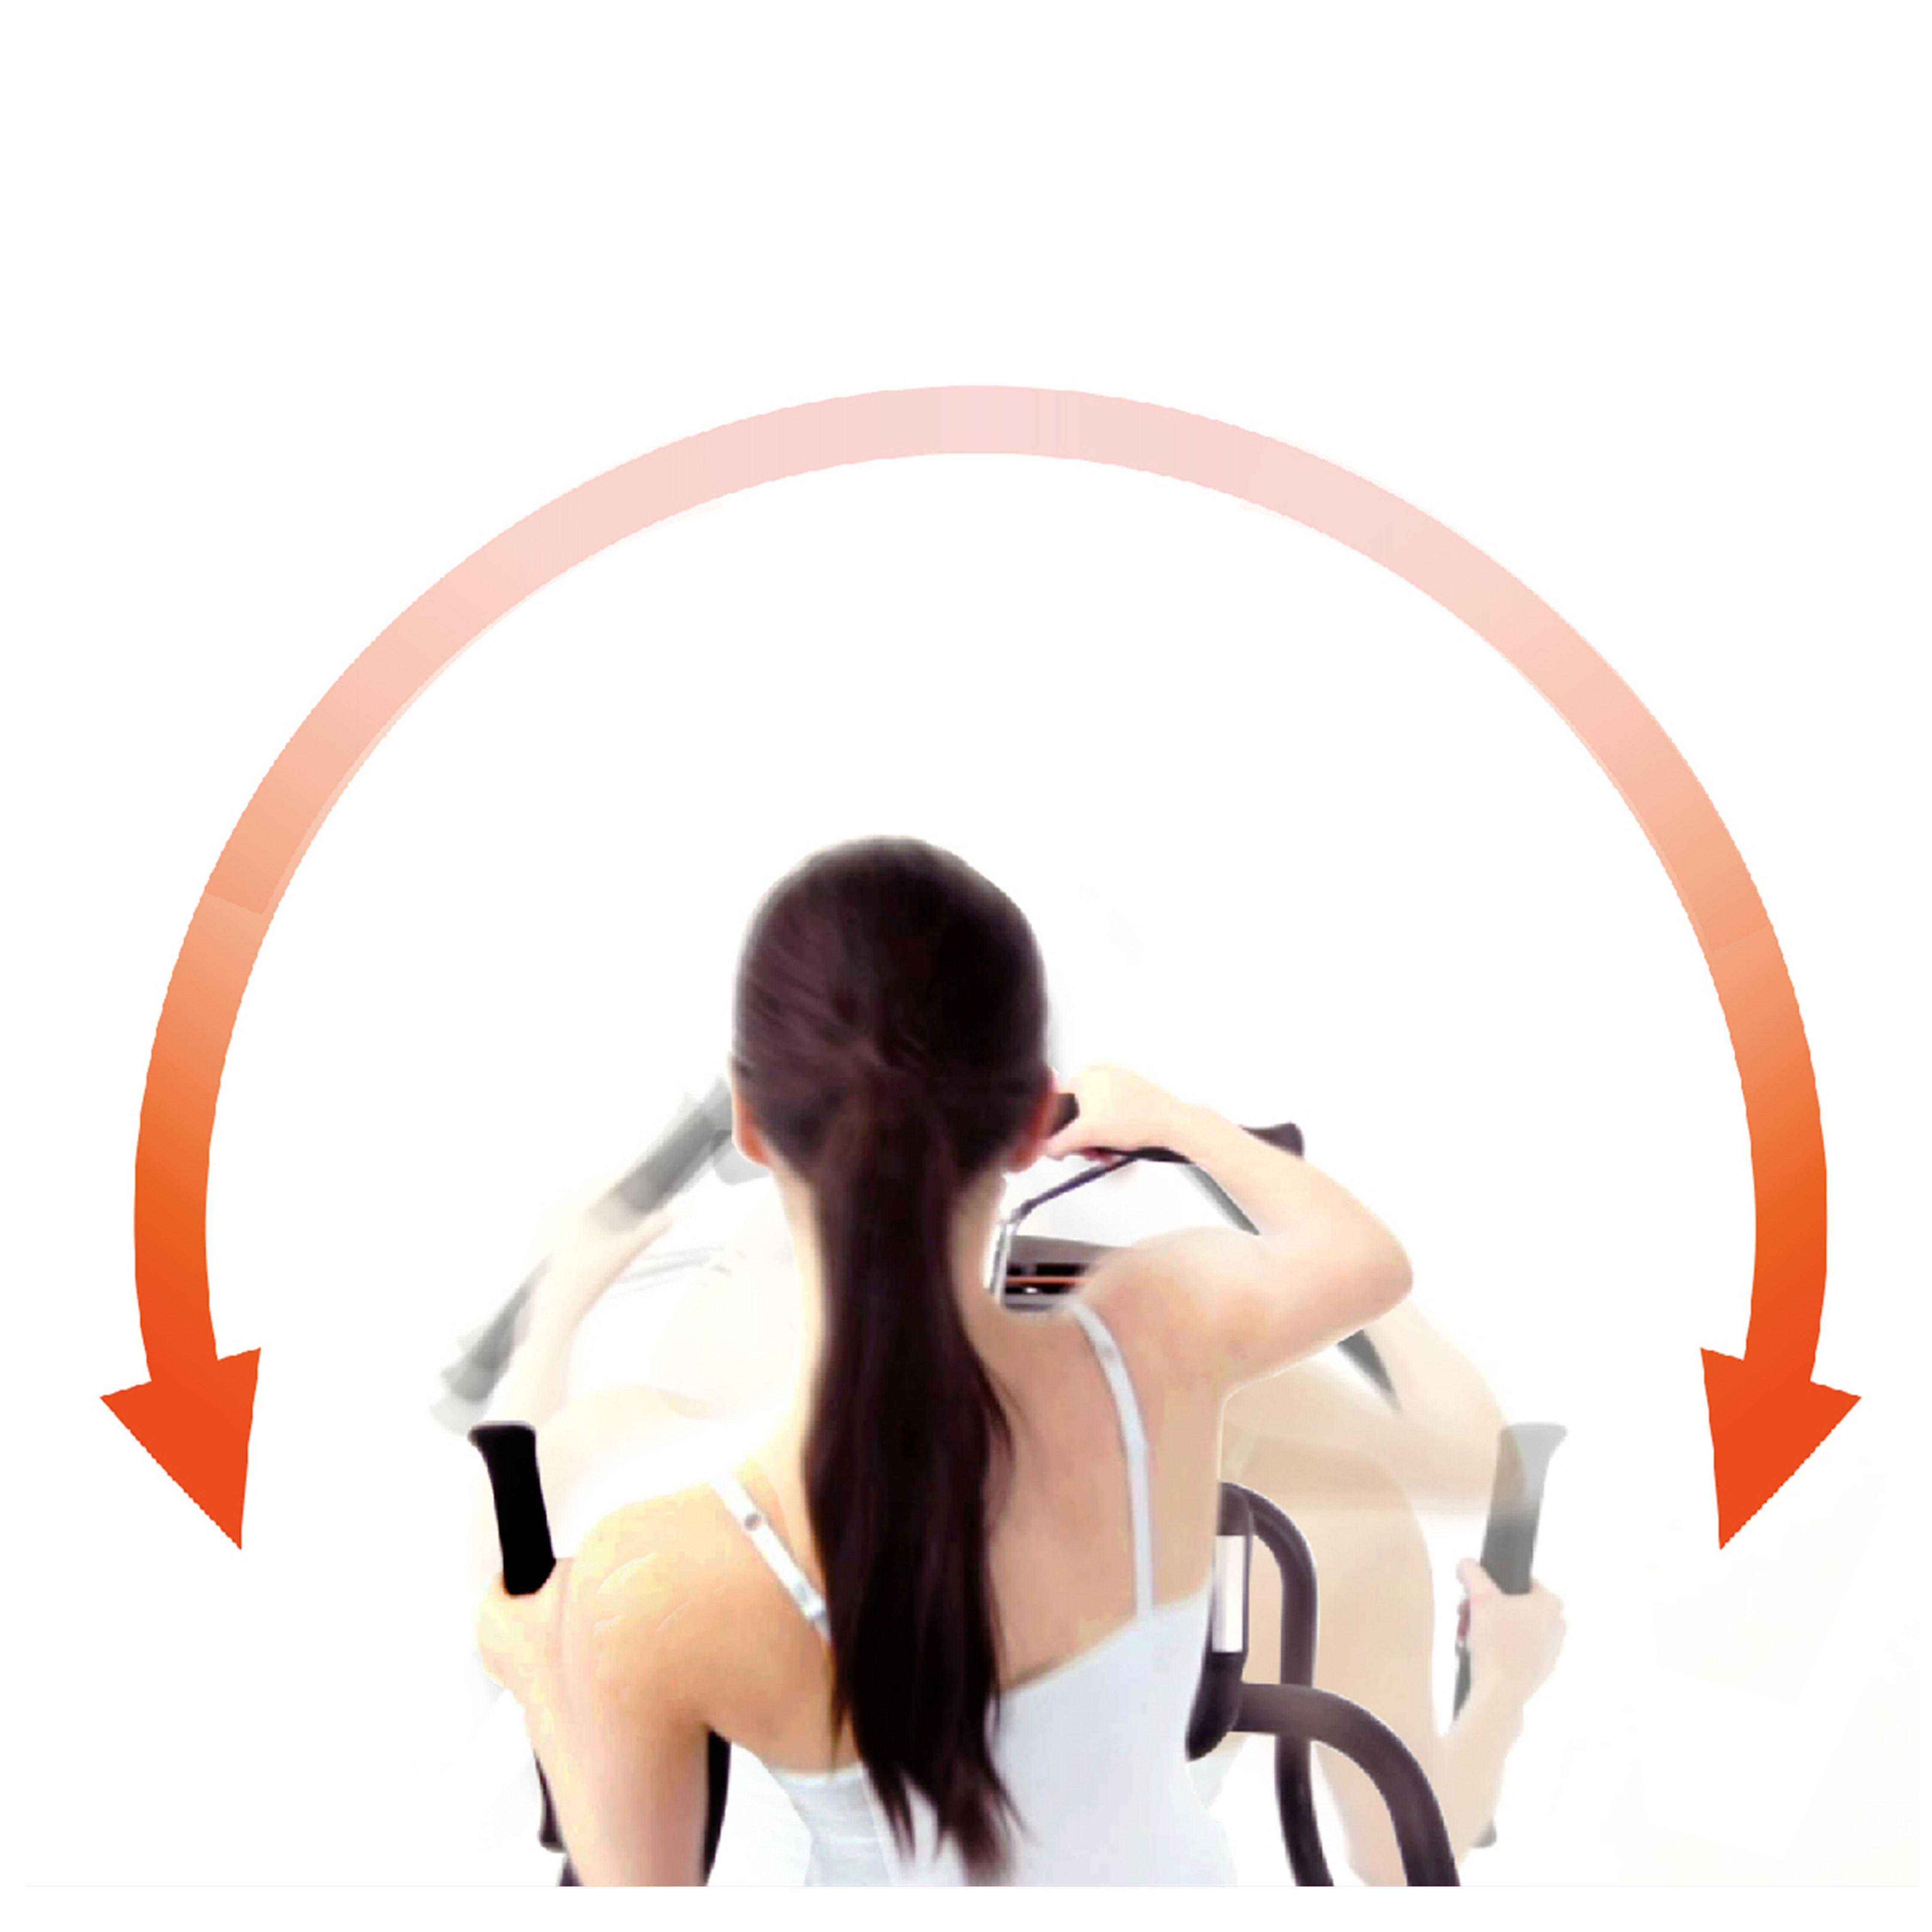 A woman riding an exercise bike, with circular arrow illustrations to show a wide angle lateral freedom of rotation.